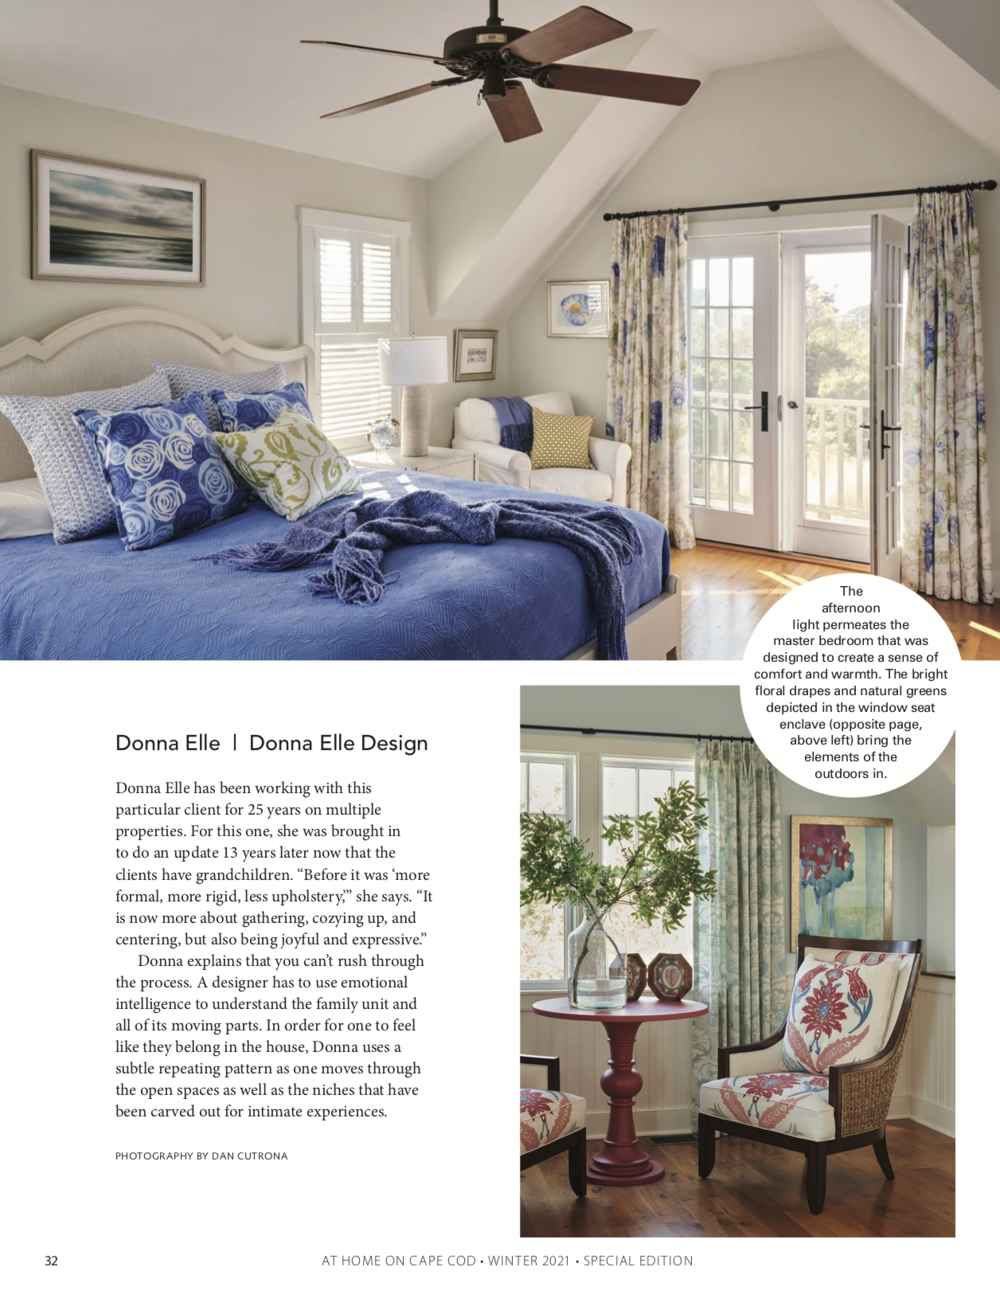 At Home on Cape Cod: The Interior Design Issue January 2021